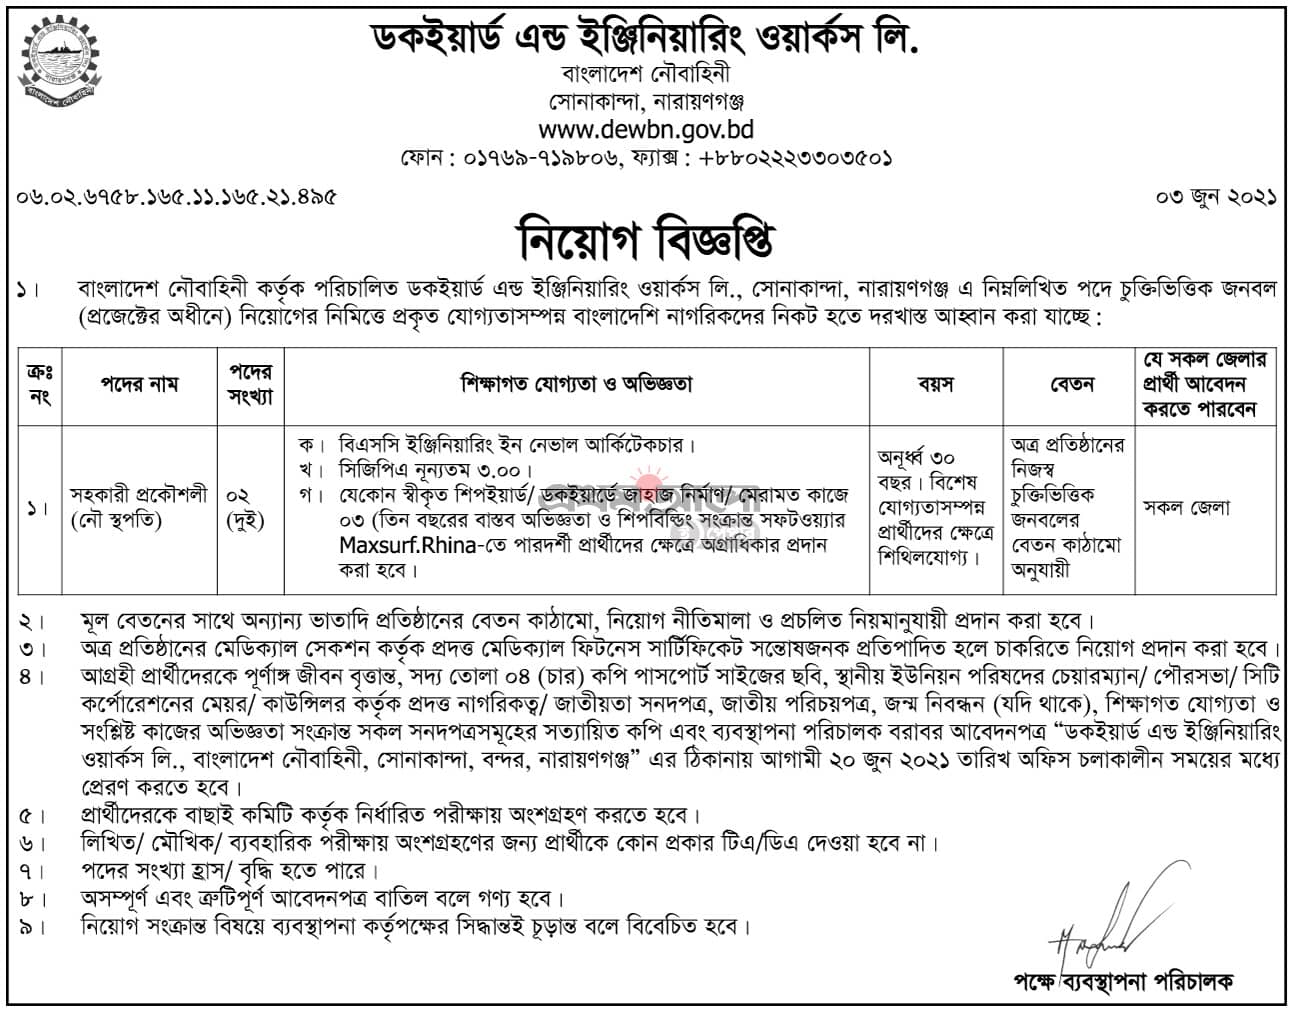 BD govt jobs in Dock Yard and Engineering Limited